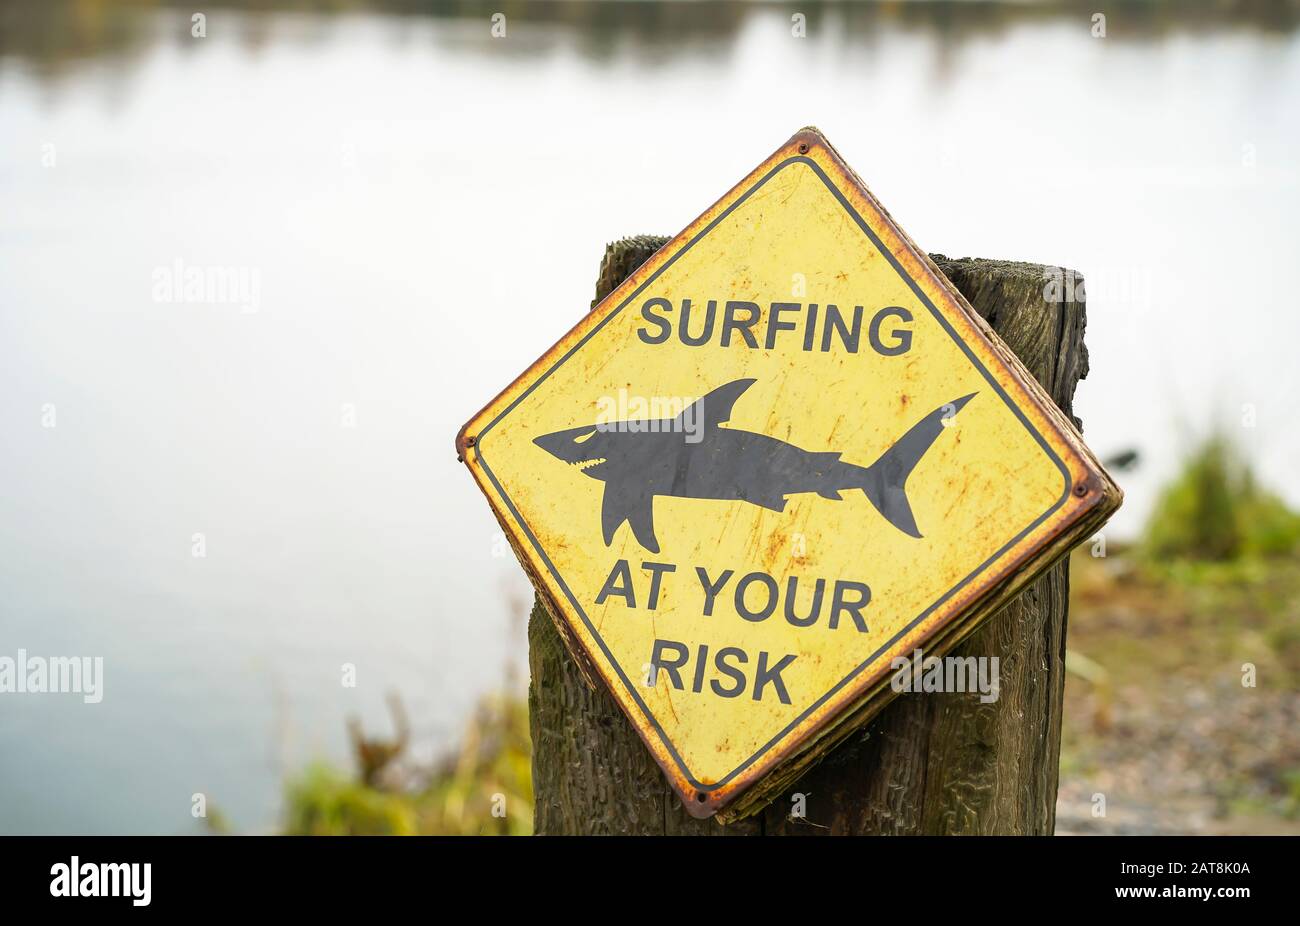 'Surfing at your risk' sign outdoors on wooden post by duck pond water at UK nature reserve! British humour, joke. Stock Photo